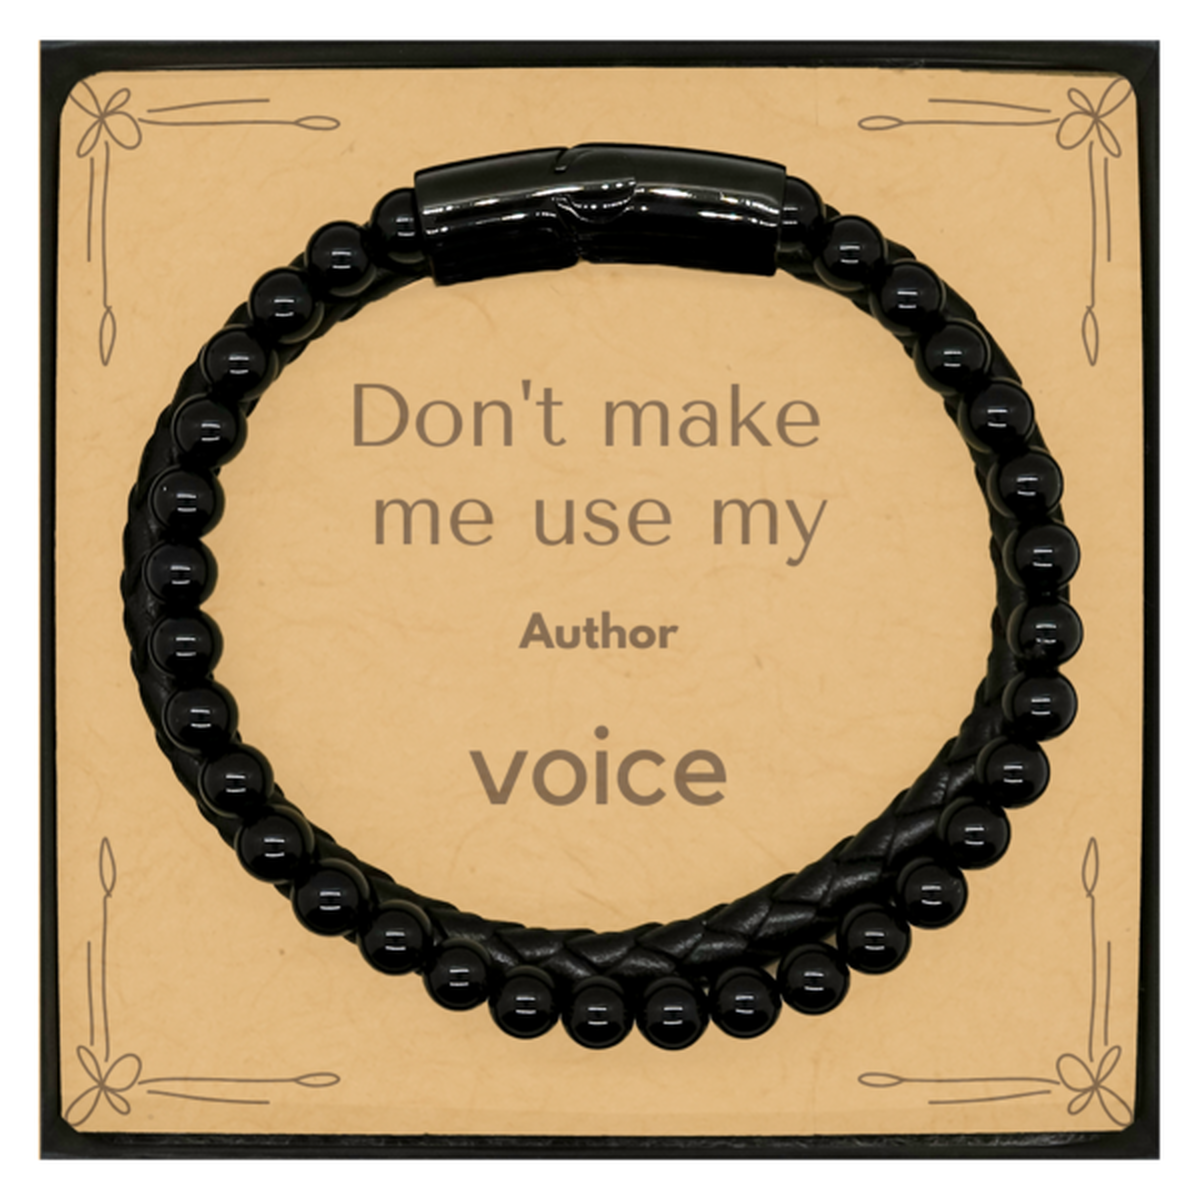 Don't make me use my Author voice, Sarcasm Author Card Gifts, Christmas Author Stone Leather Bracelets Birthday Unique Gifts For Author Coworkers, Men, Women, Colleague, Friends